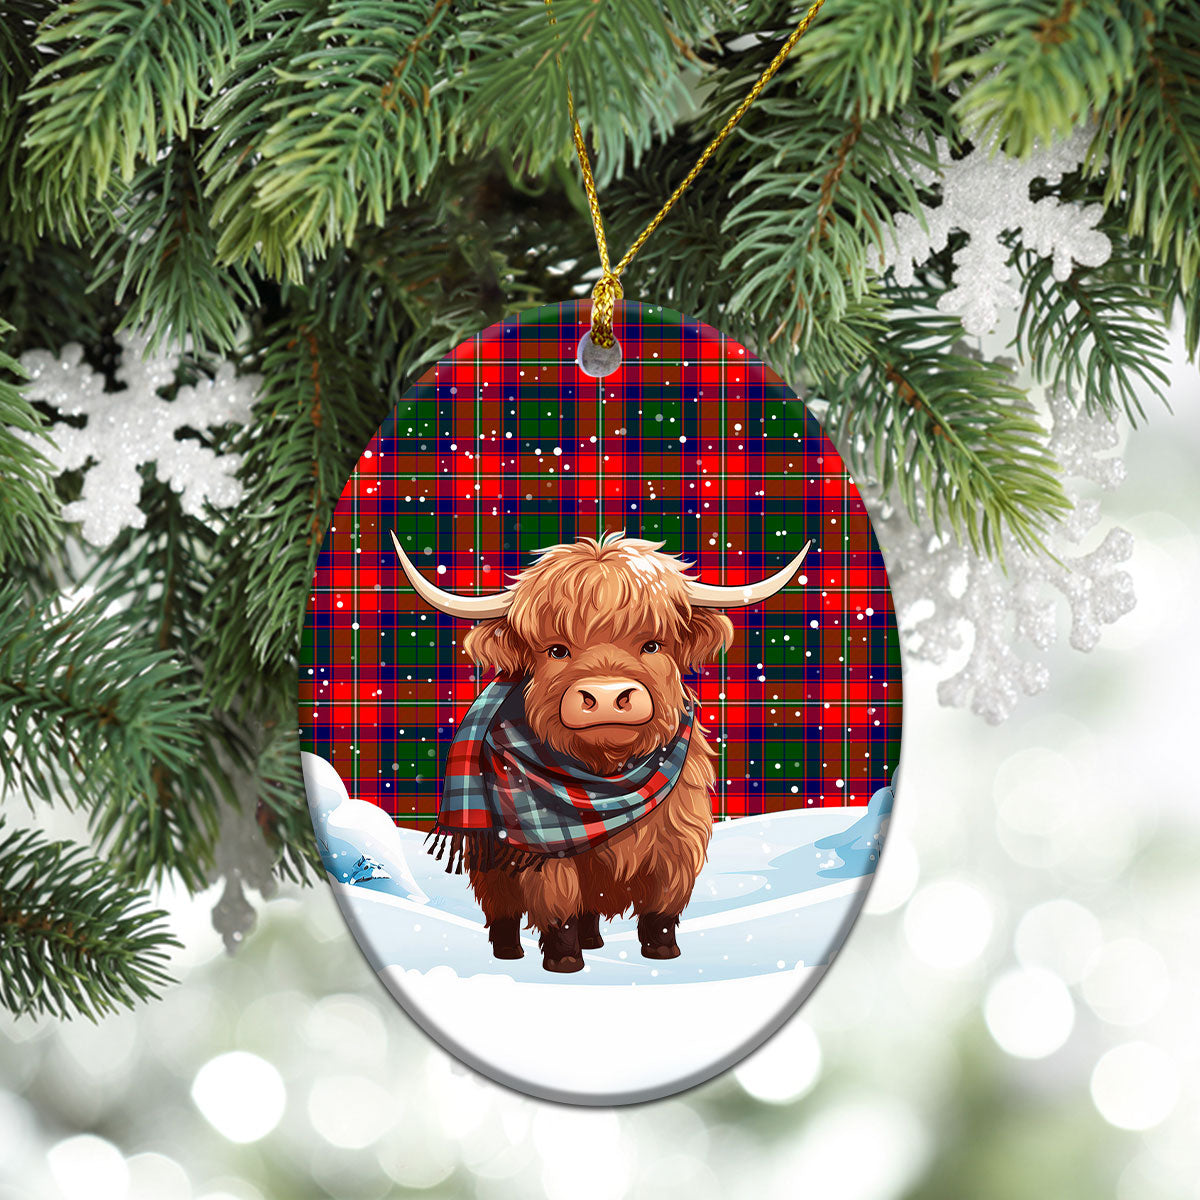 Belshes Tartan Christmas Ceramic Ornament - Highland Cows Snow Style